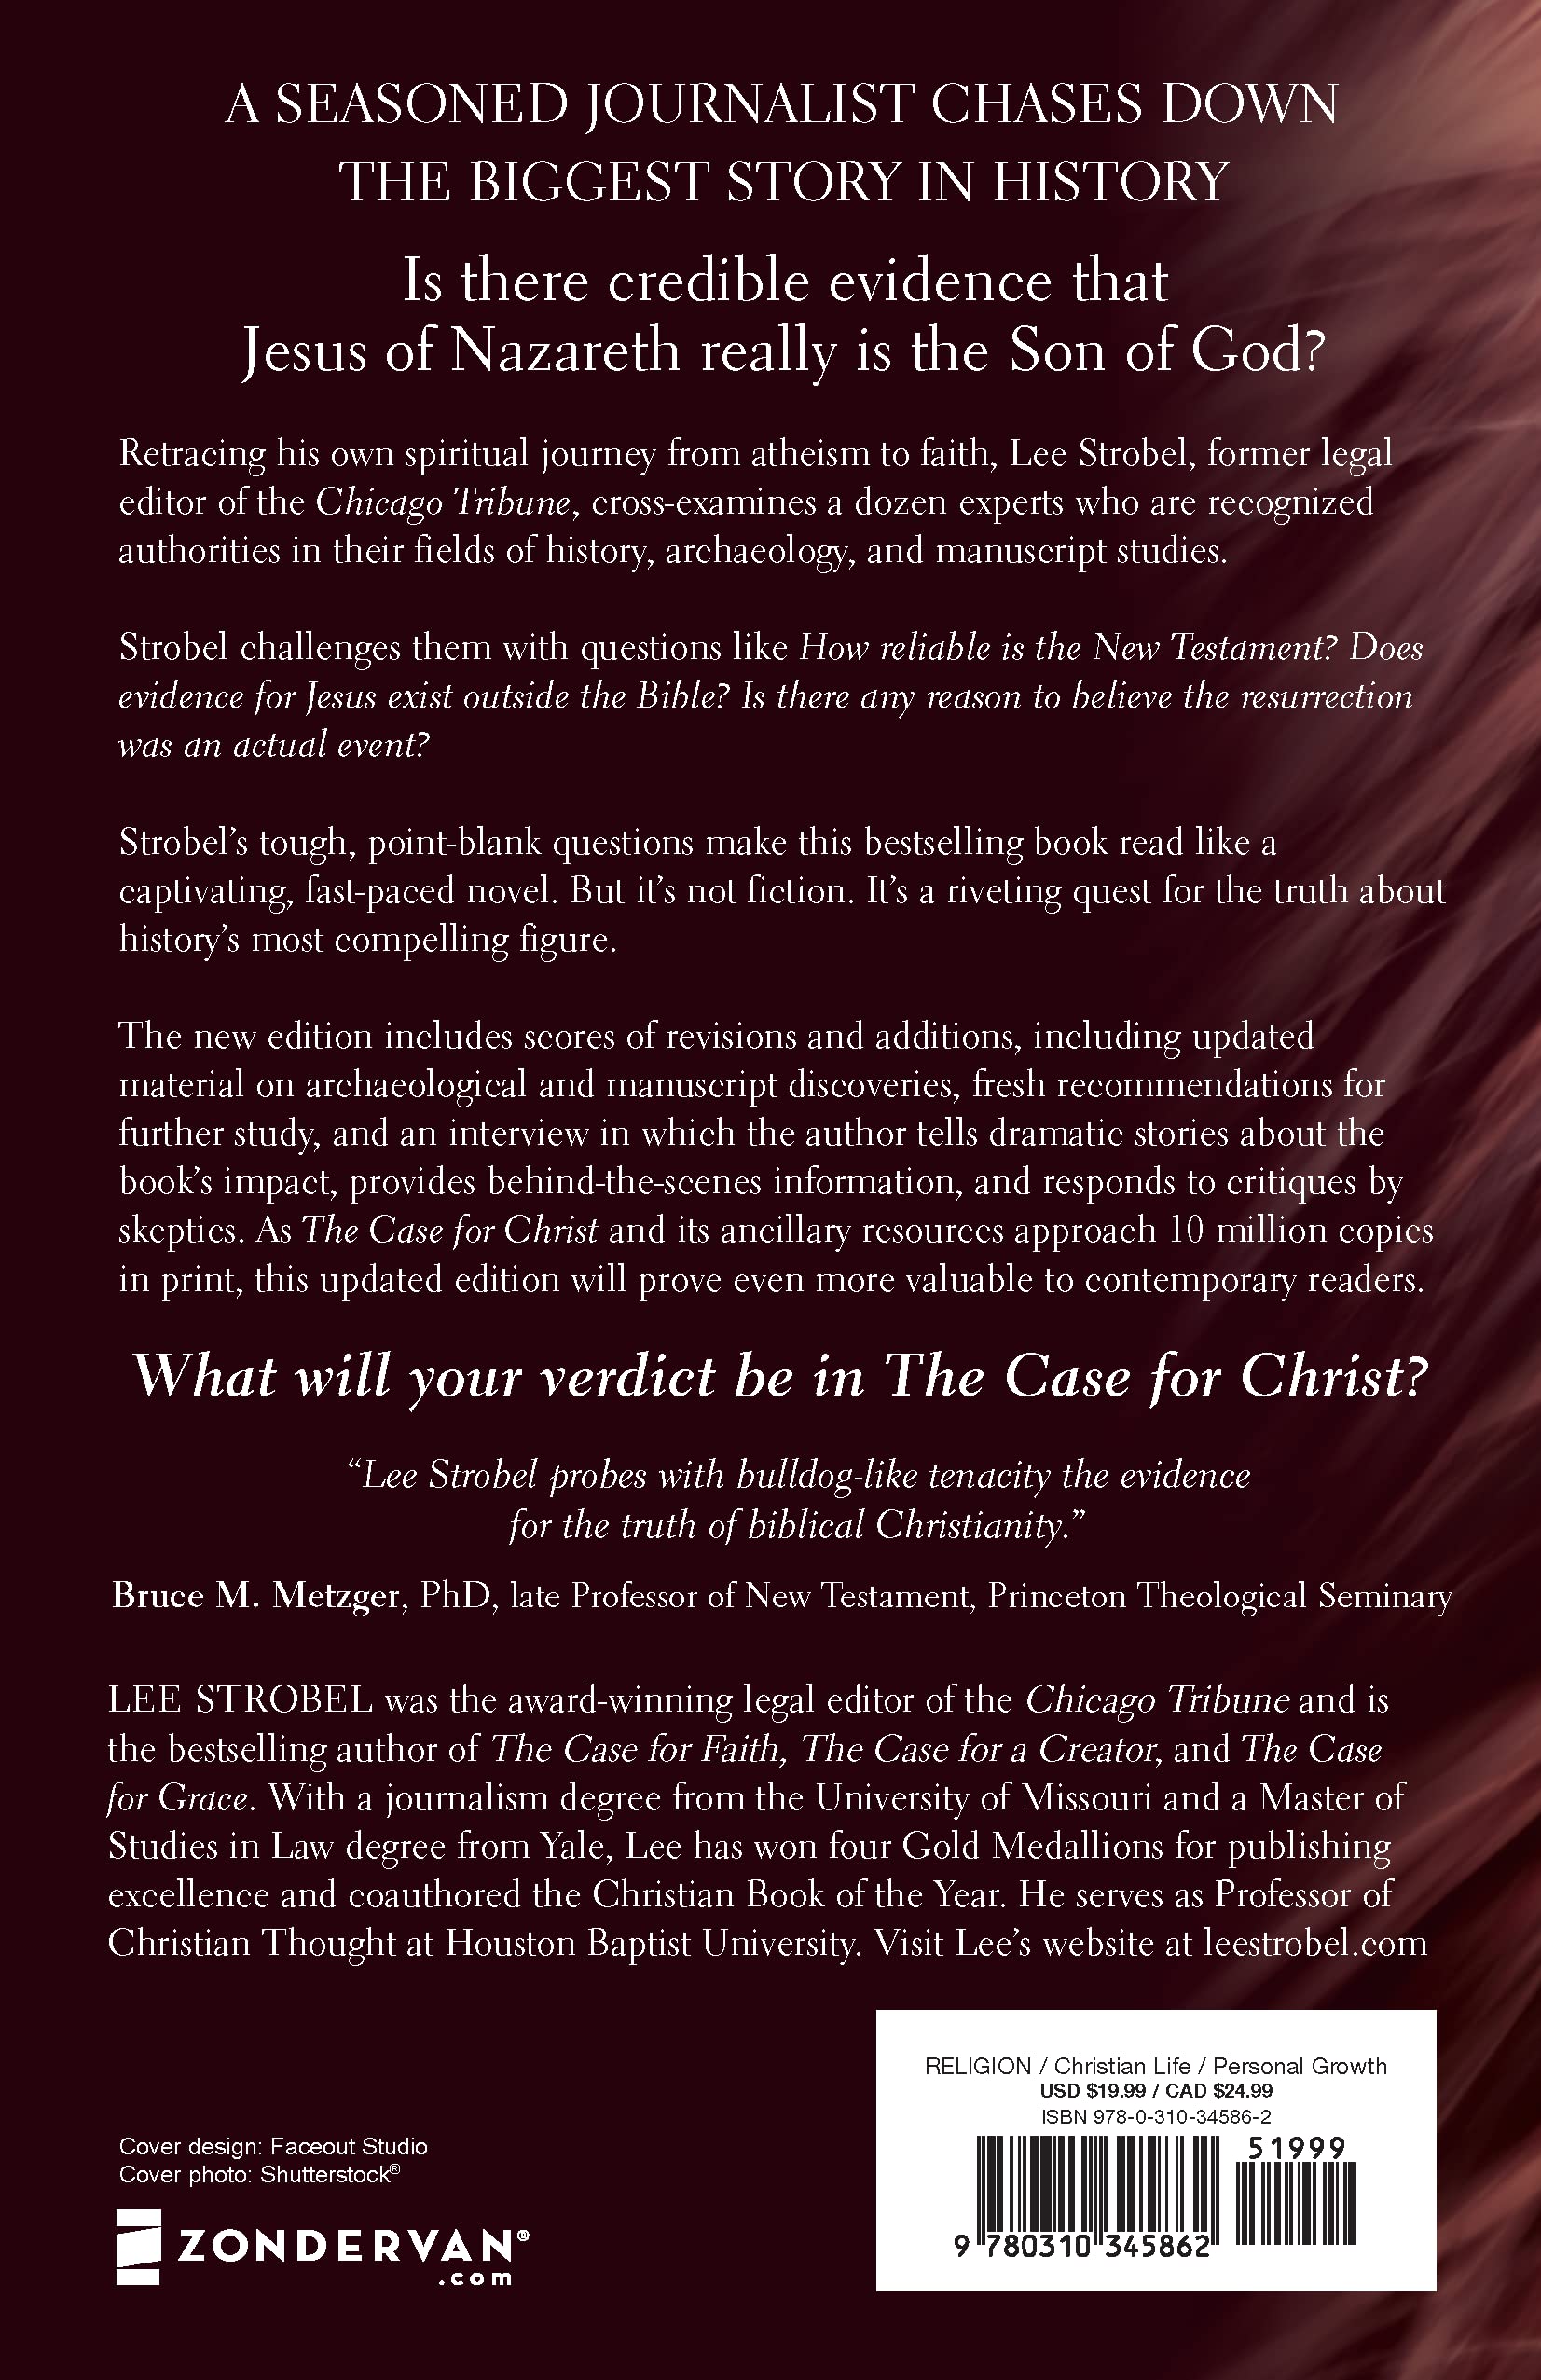 The Case for Christ: A Journalist's Personal Investigation of the Evidence for Jesus (Case for ... Series)